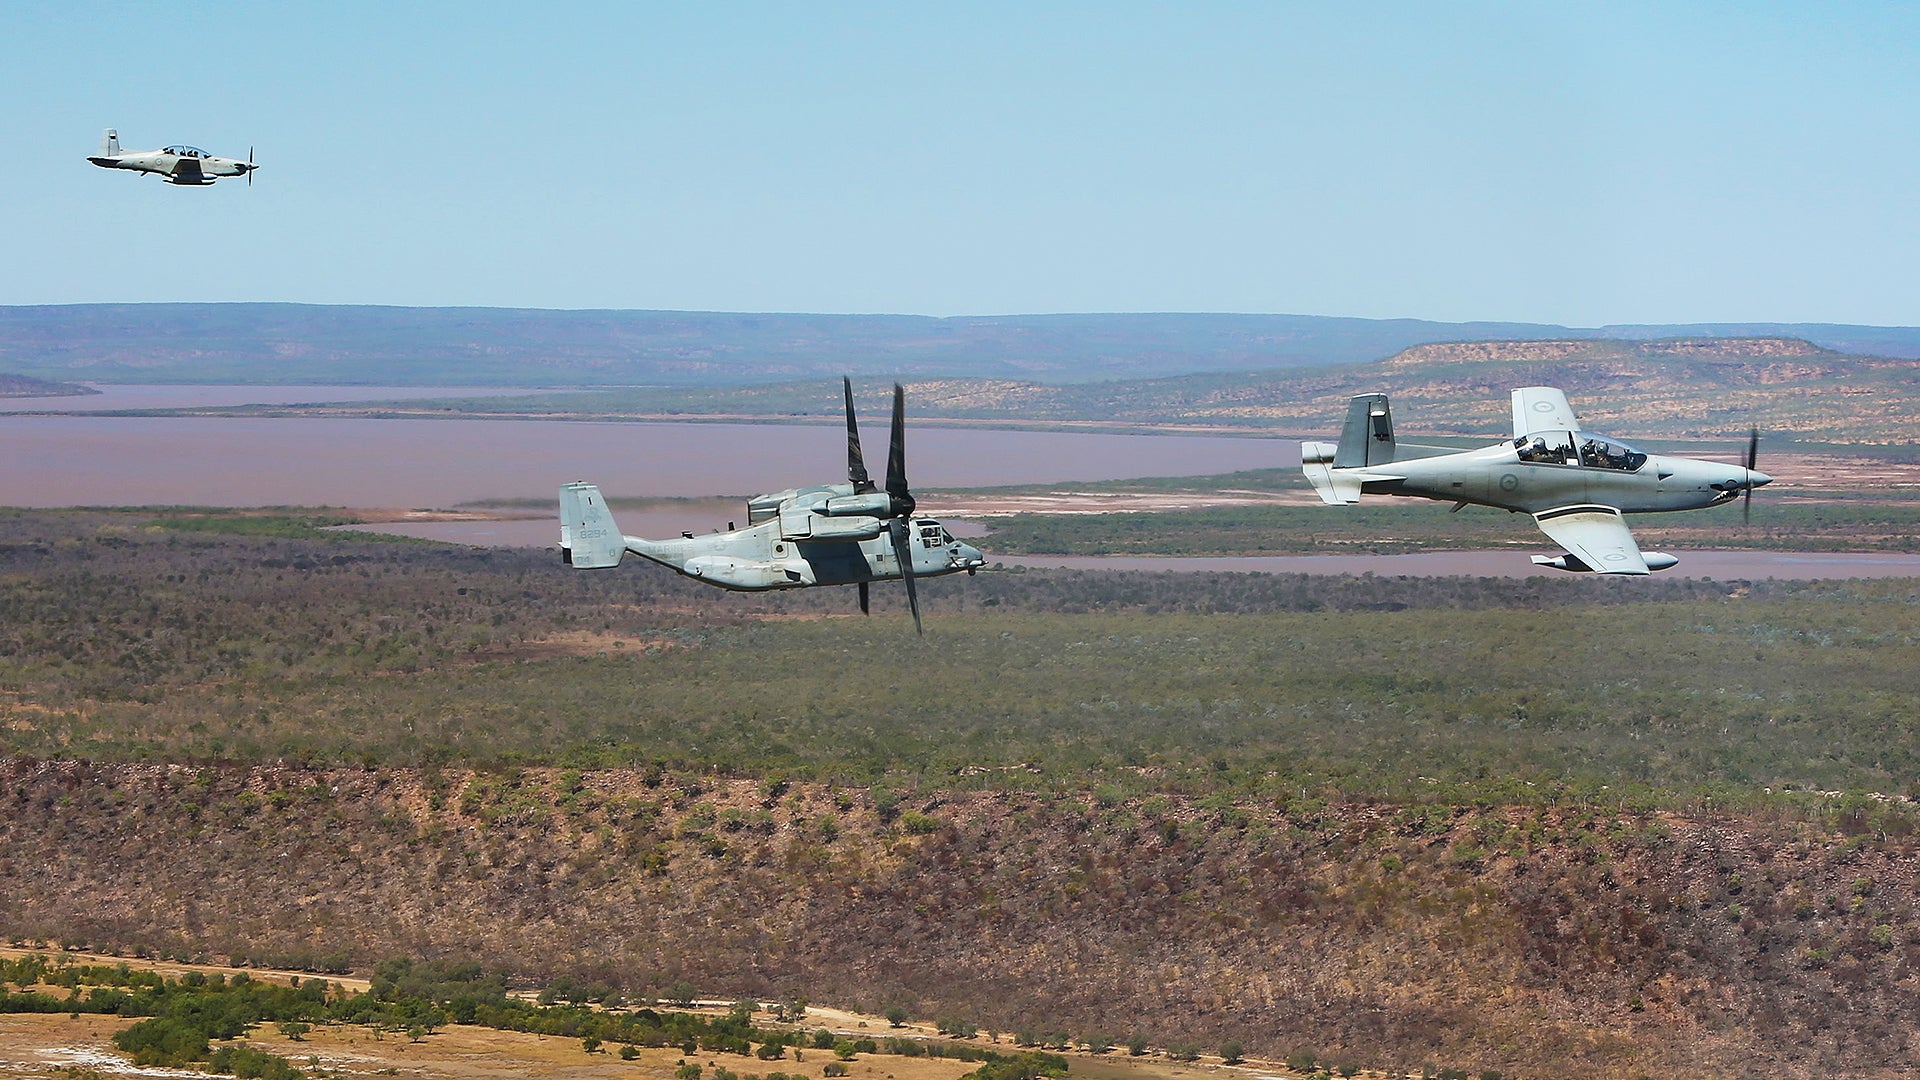 Australia’s Exercise Pitch Black Saw MV-22 Ospreys Escorted By Light Air Support Planes